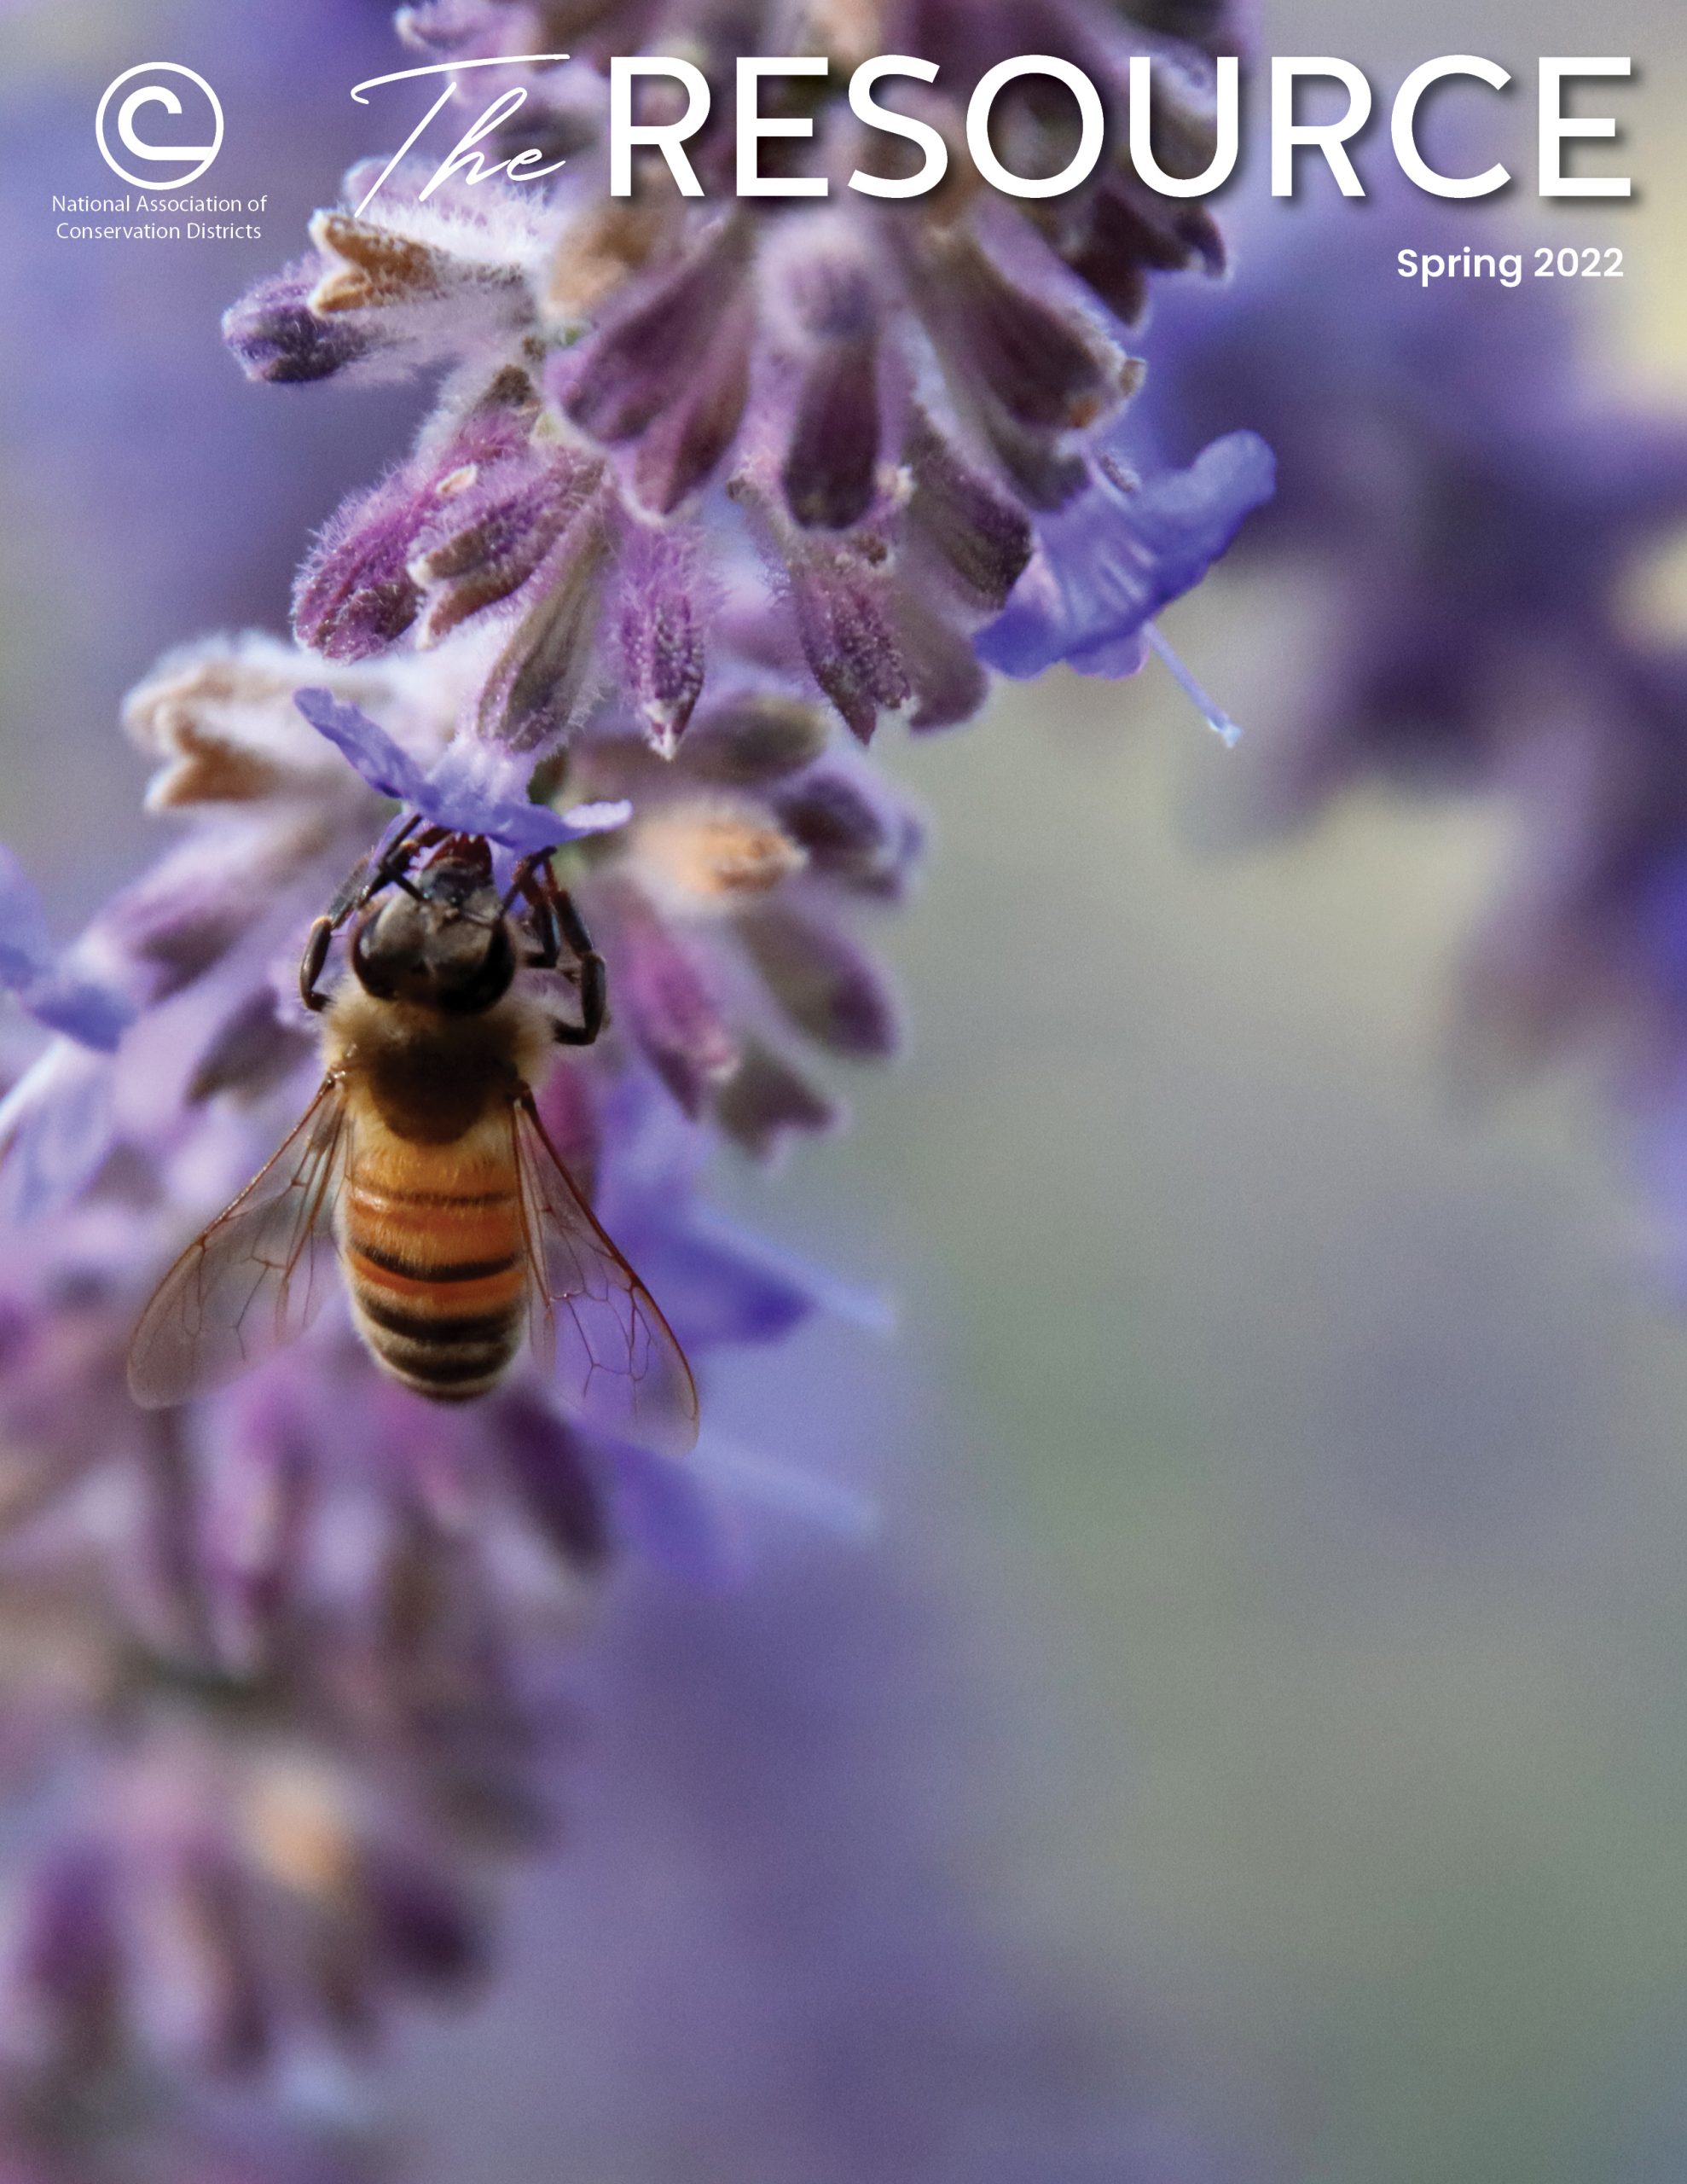 cover of Theimage: close up of a bee on a lavender plant; text: National Association of Conservation Districts The Resource Spring 2022